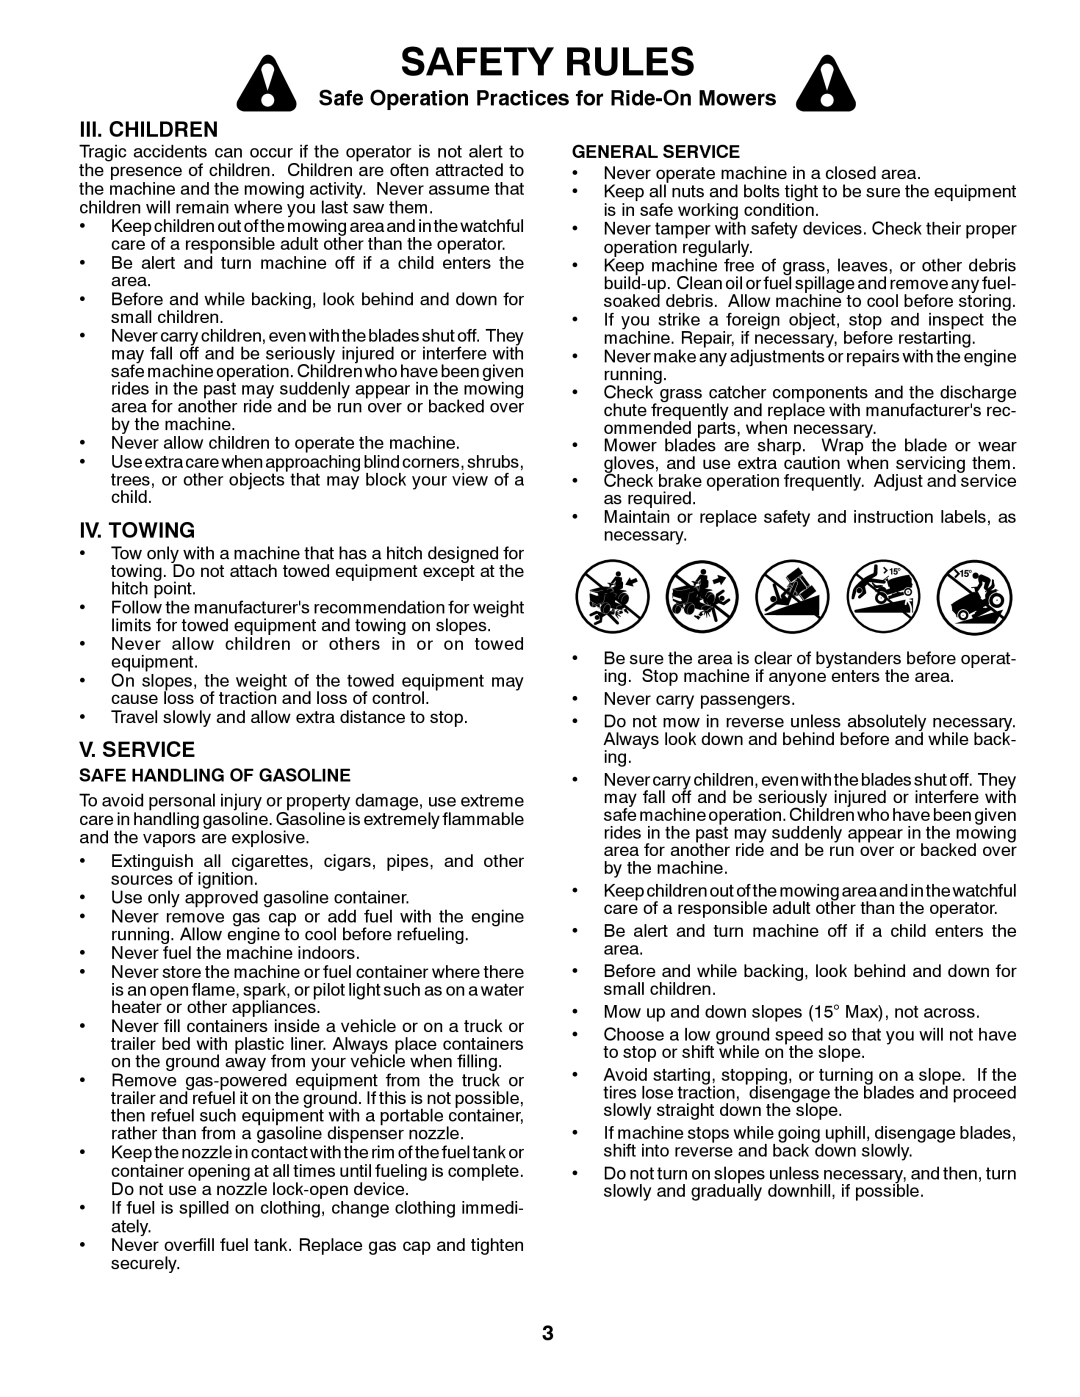 Poulan 96042011001 manual Iii. Children, Iv. Towing, V. Service, Safety Rules, Safe Operation Practices for Ride-OnMowers 